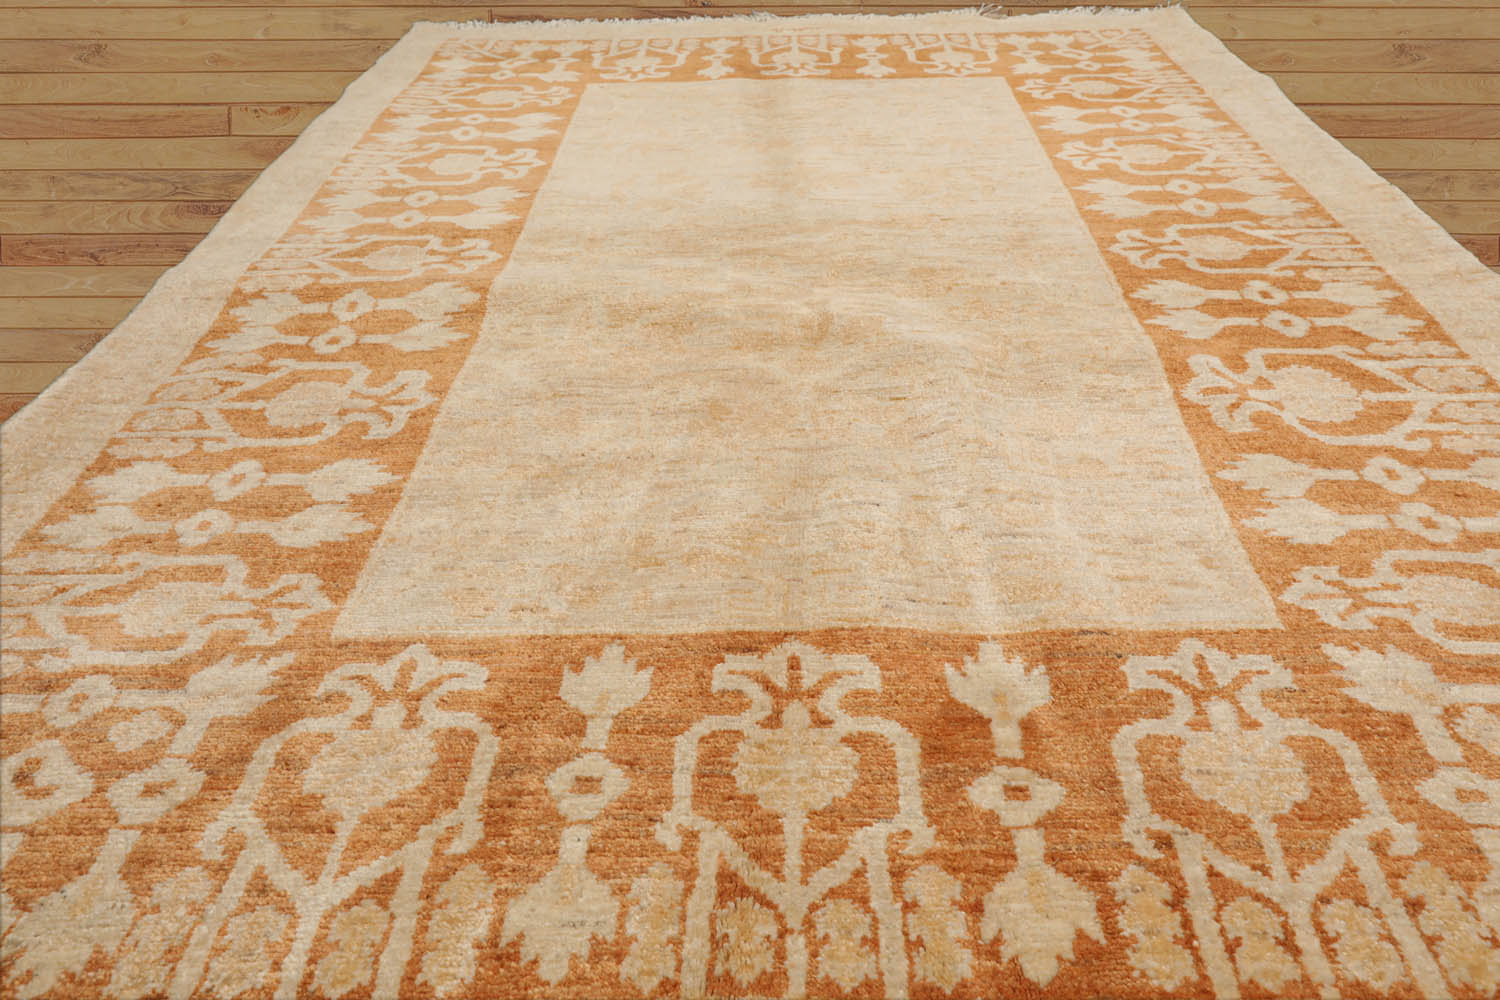 Sauceda 4x6 Hand Knotted 100% Wool Peshawar Traditional Oriental Area Rug Beige, Caramel Color